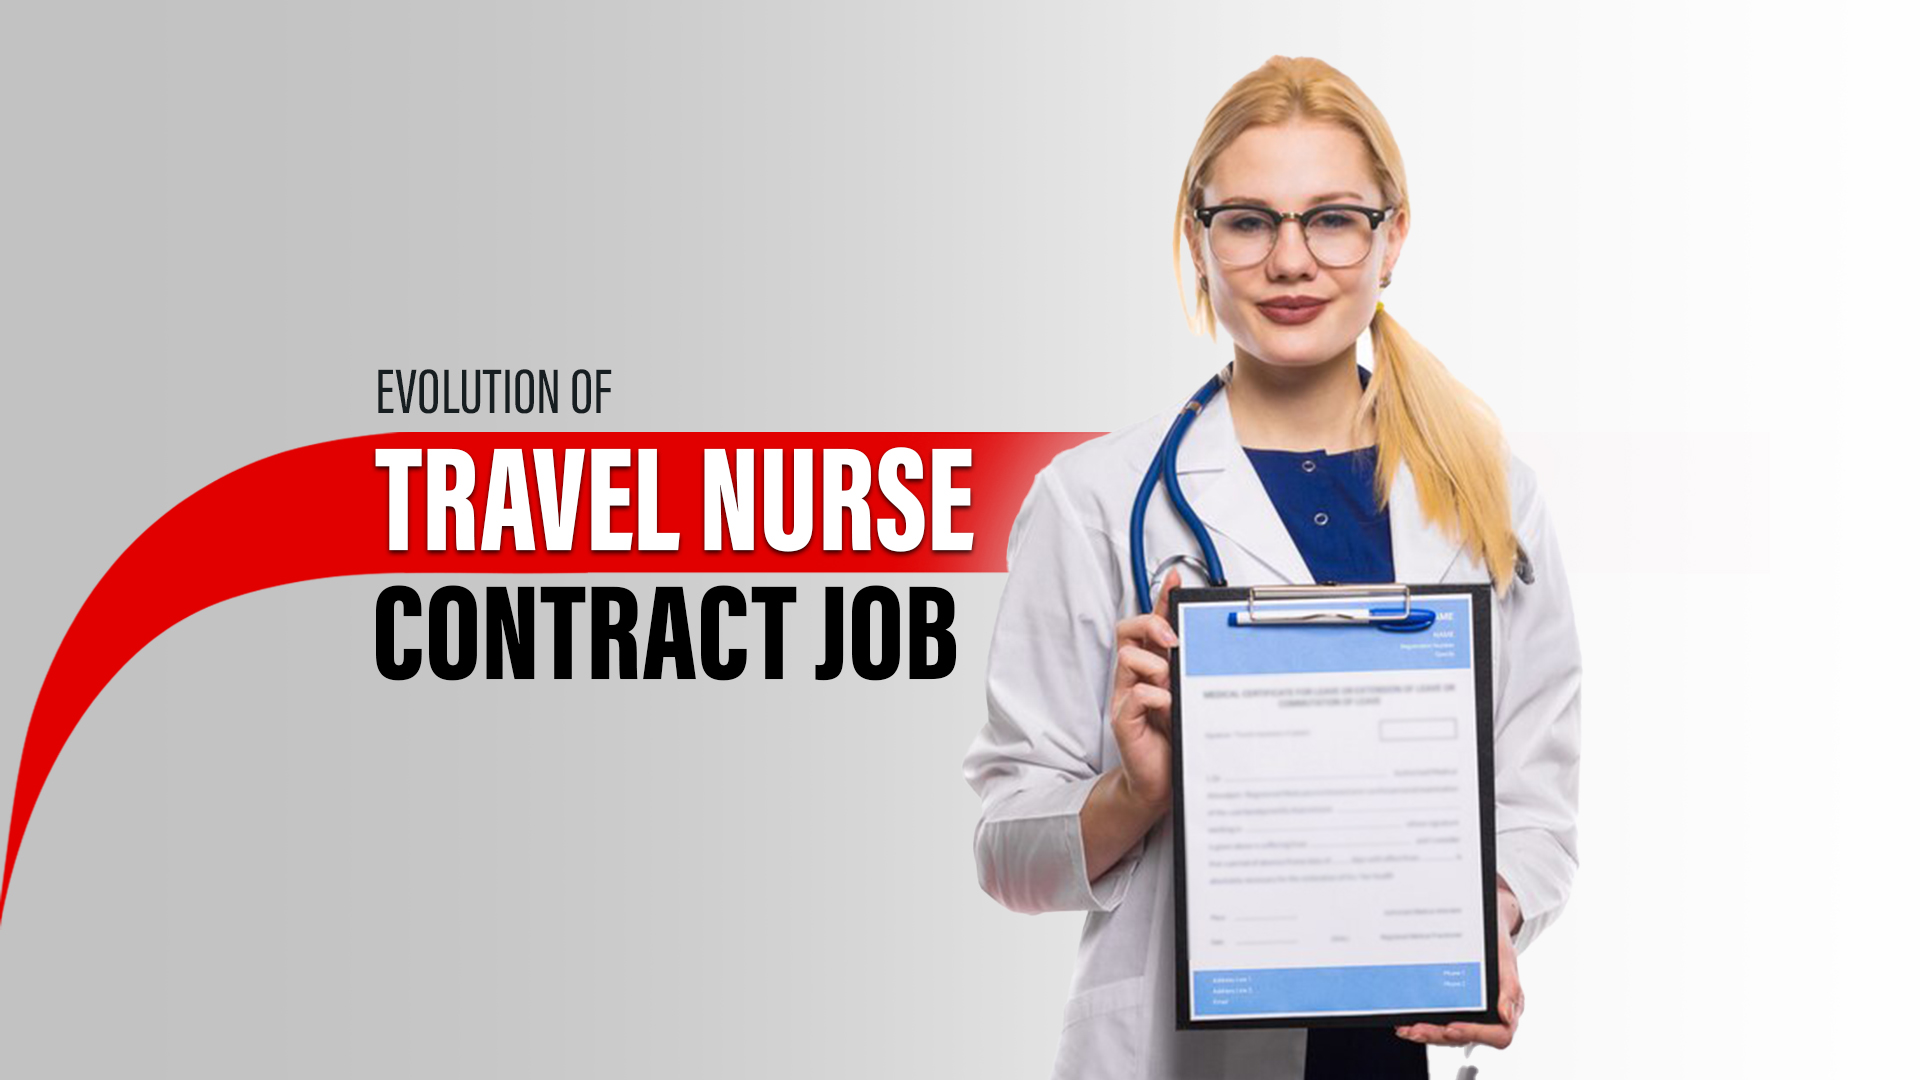 How Travel Nurse Contract Jobs Have Evolved Over The Years